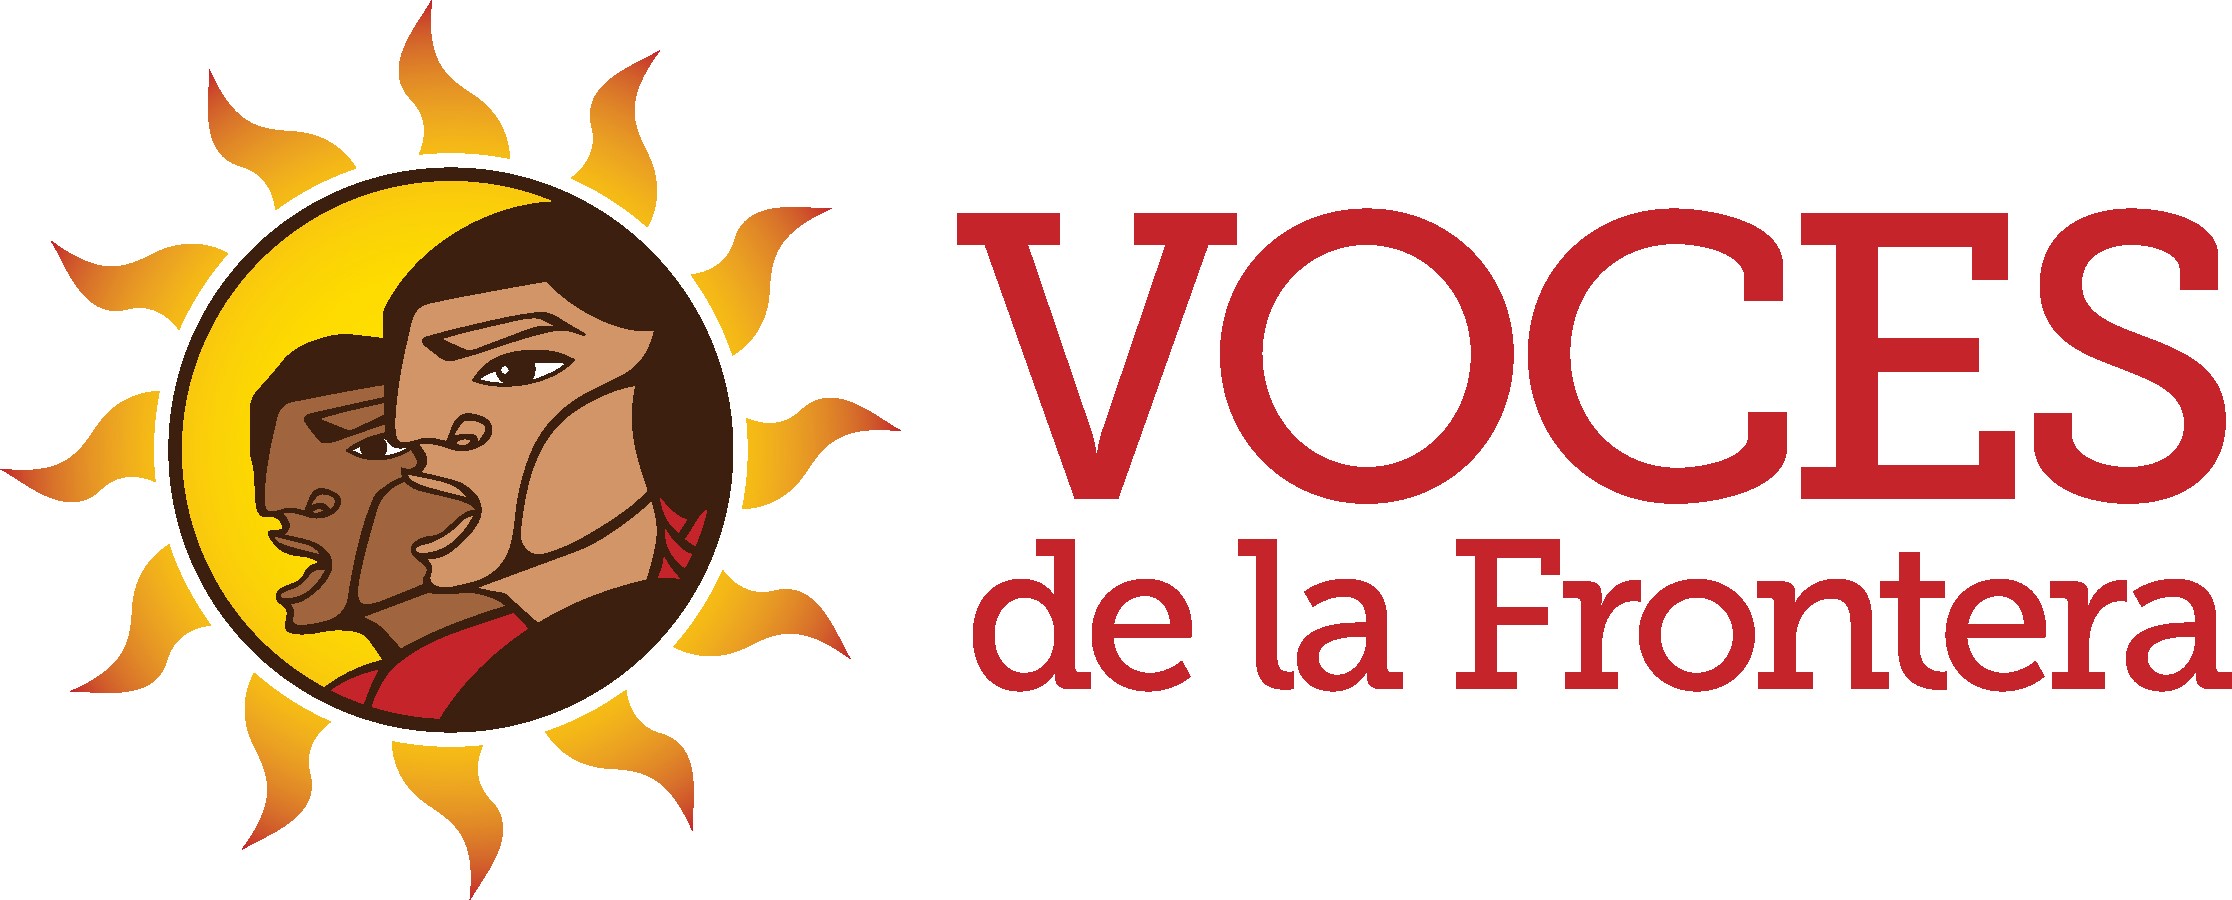 Wisconsin’s largest grassroots Latinx organization, Voces de la Frontera Action, responds to President Biden’s State of the Union address and visit to Madison